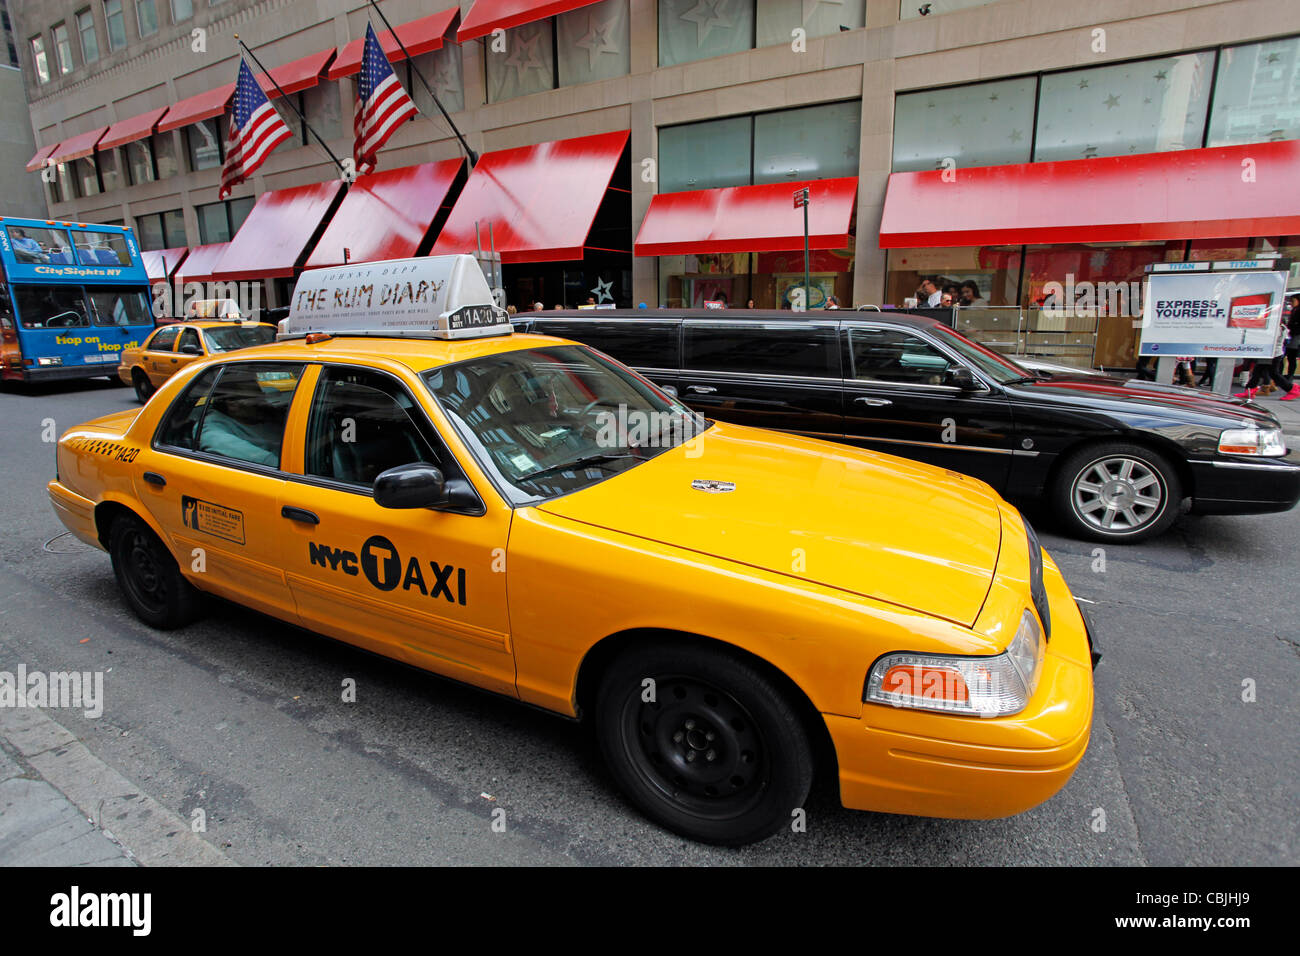 Yellow taxi cab in New York, United States of America Stock Photo